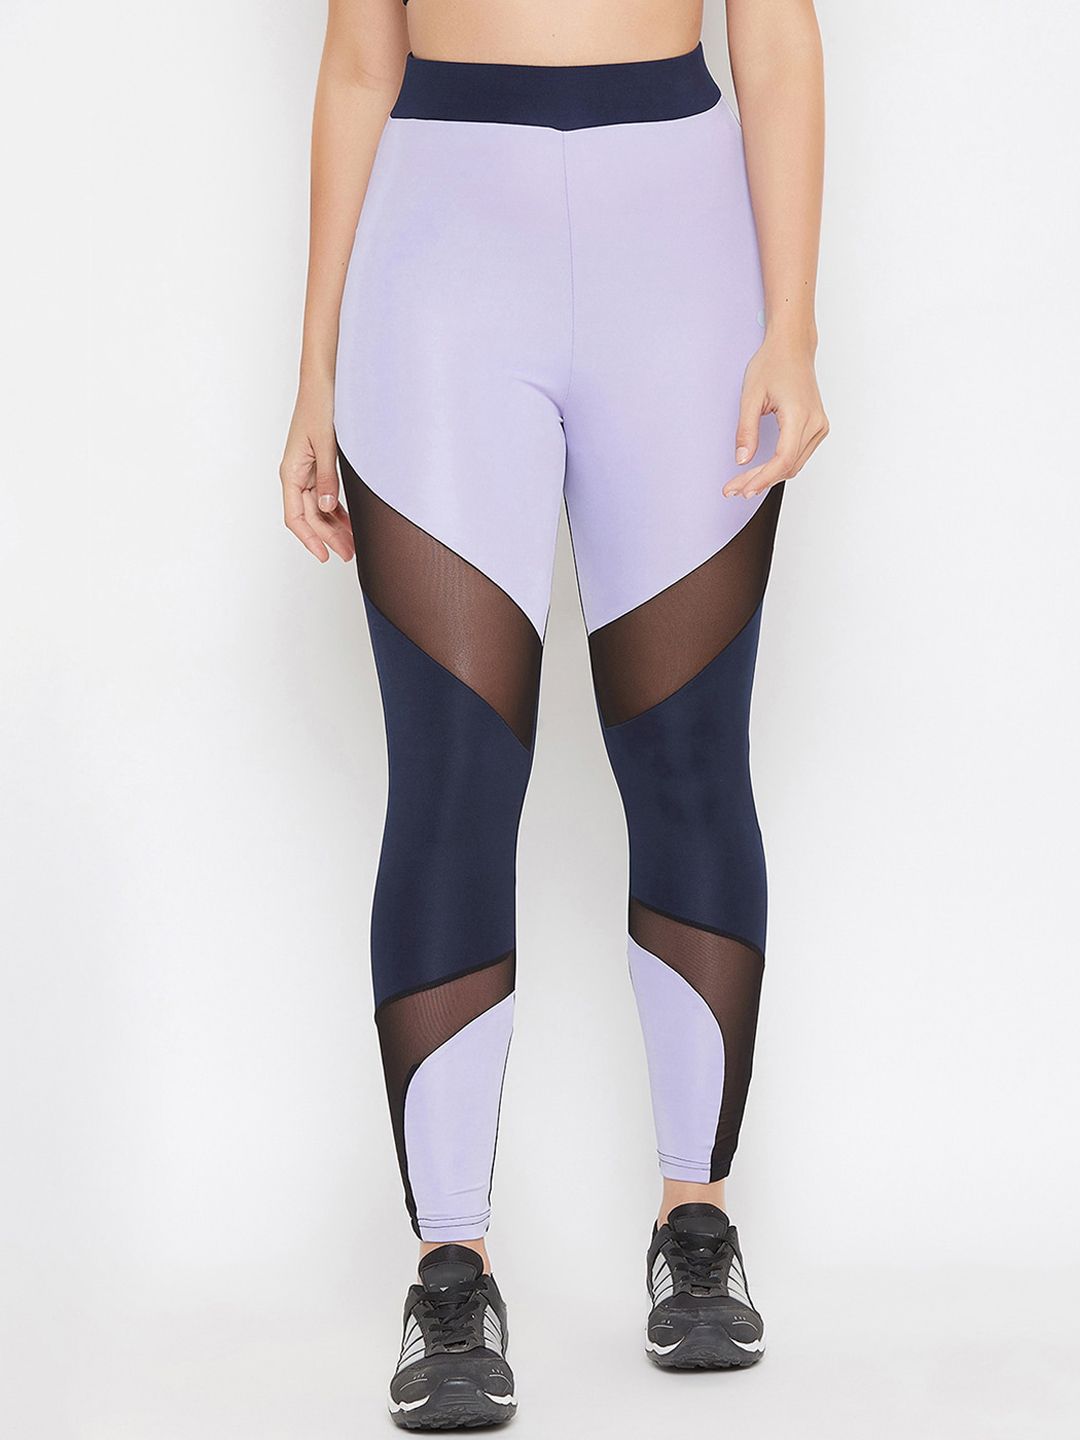 Clovia Women Purple & Navy Blue Colourblocked Activewear Sports Ankle Length Tights Price in India